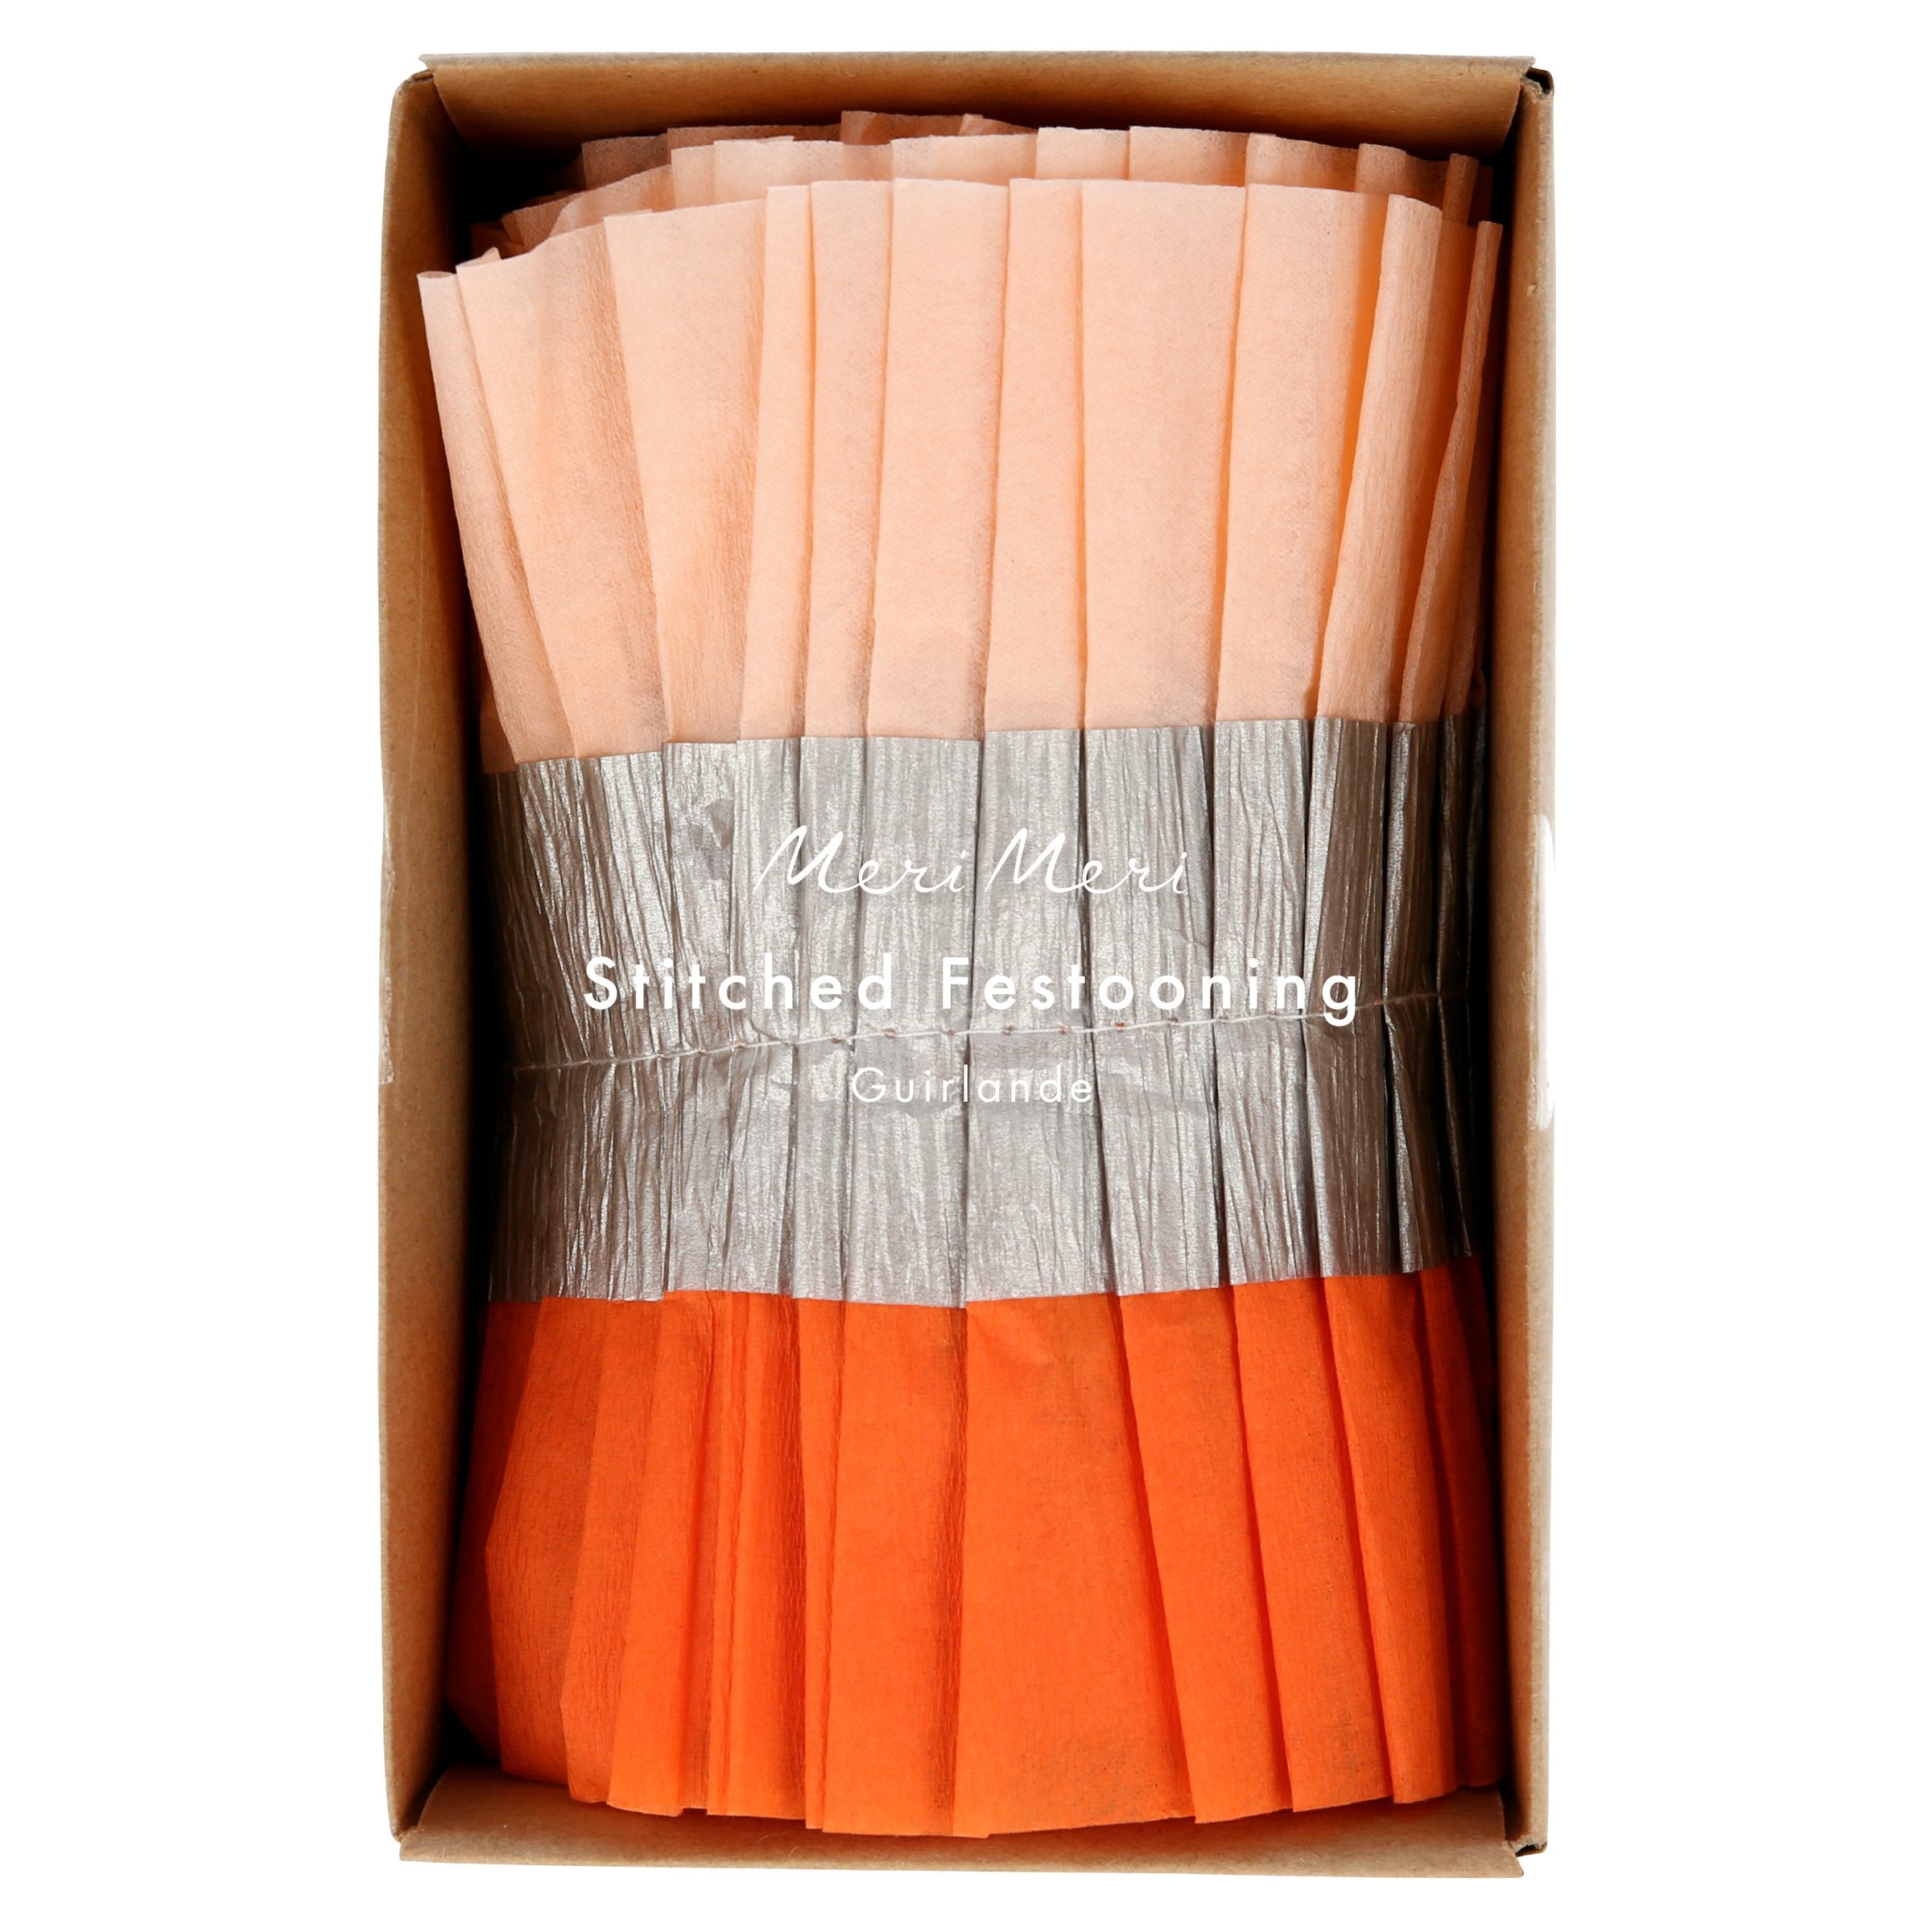 Our pastel party streamers are a stylish way to add colour to your Halloween party decorations.